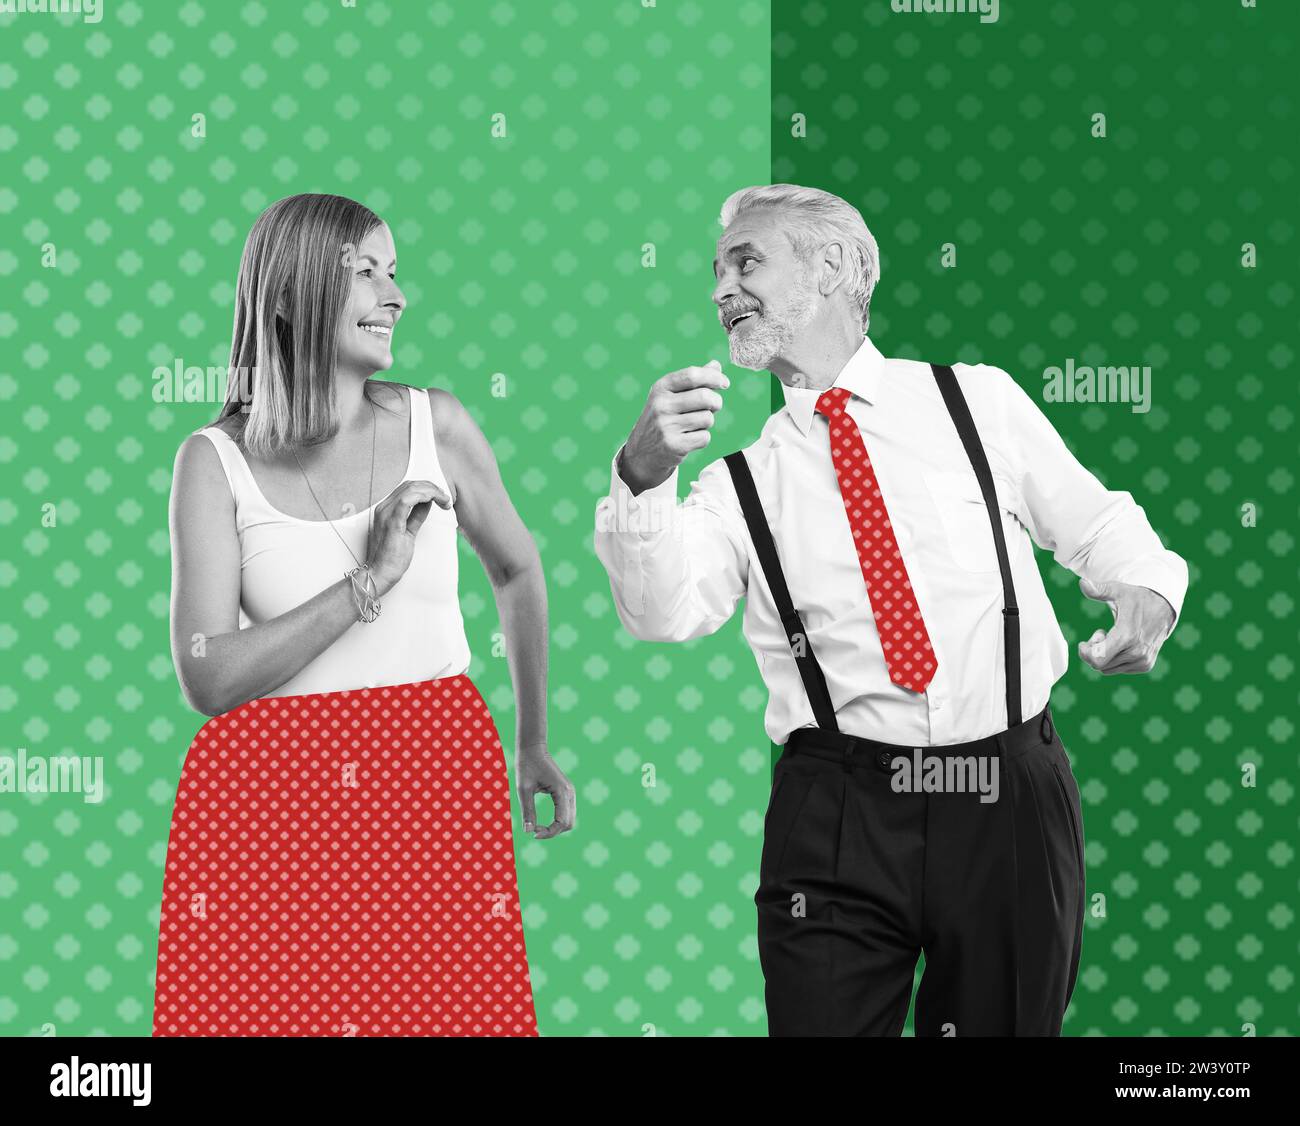 Happy couple dancing on bright background. Creative collage with stylish mature man and woman. Concept of music, energy, party, fashion, lifestyle Stock Photo